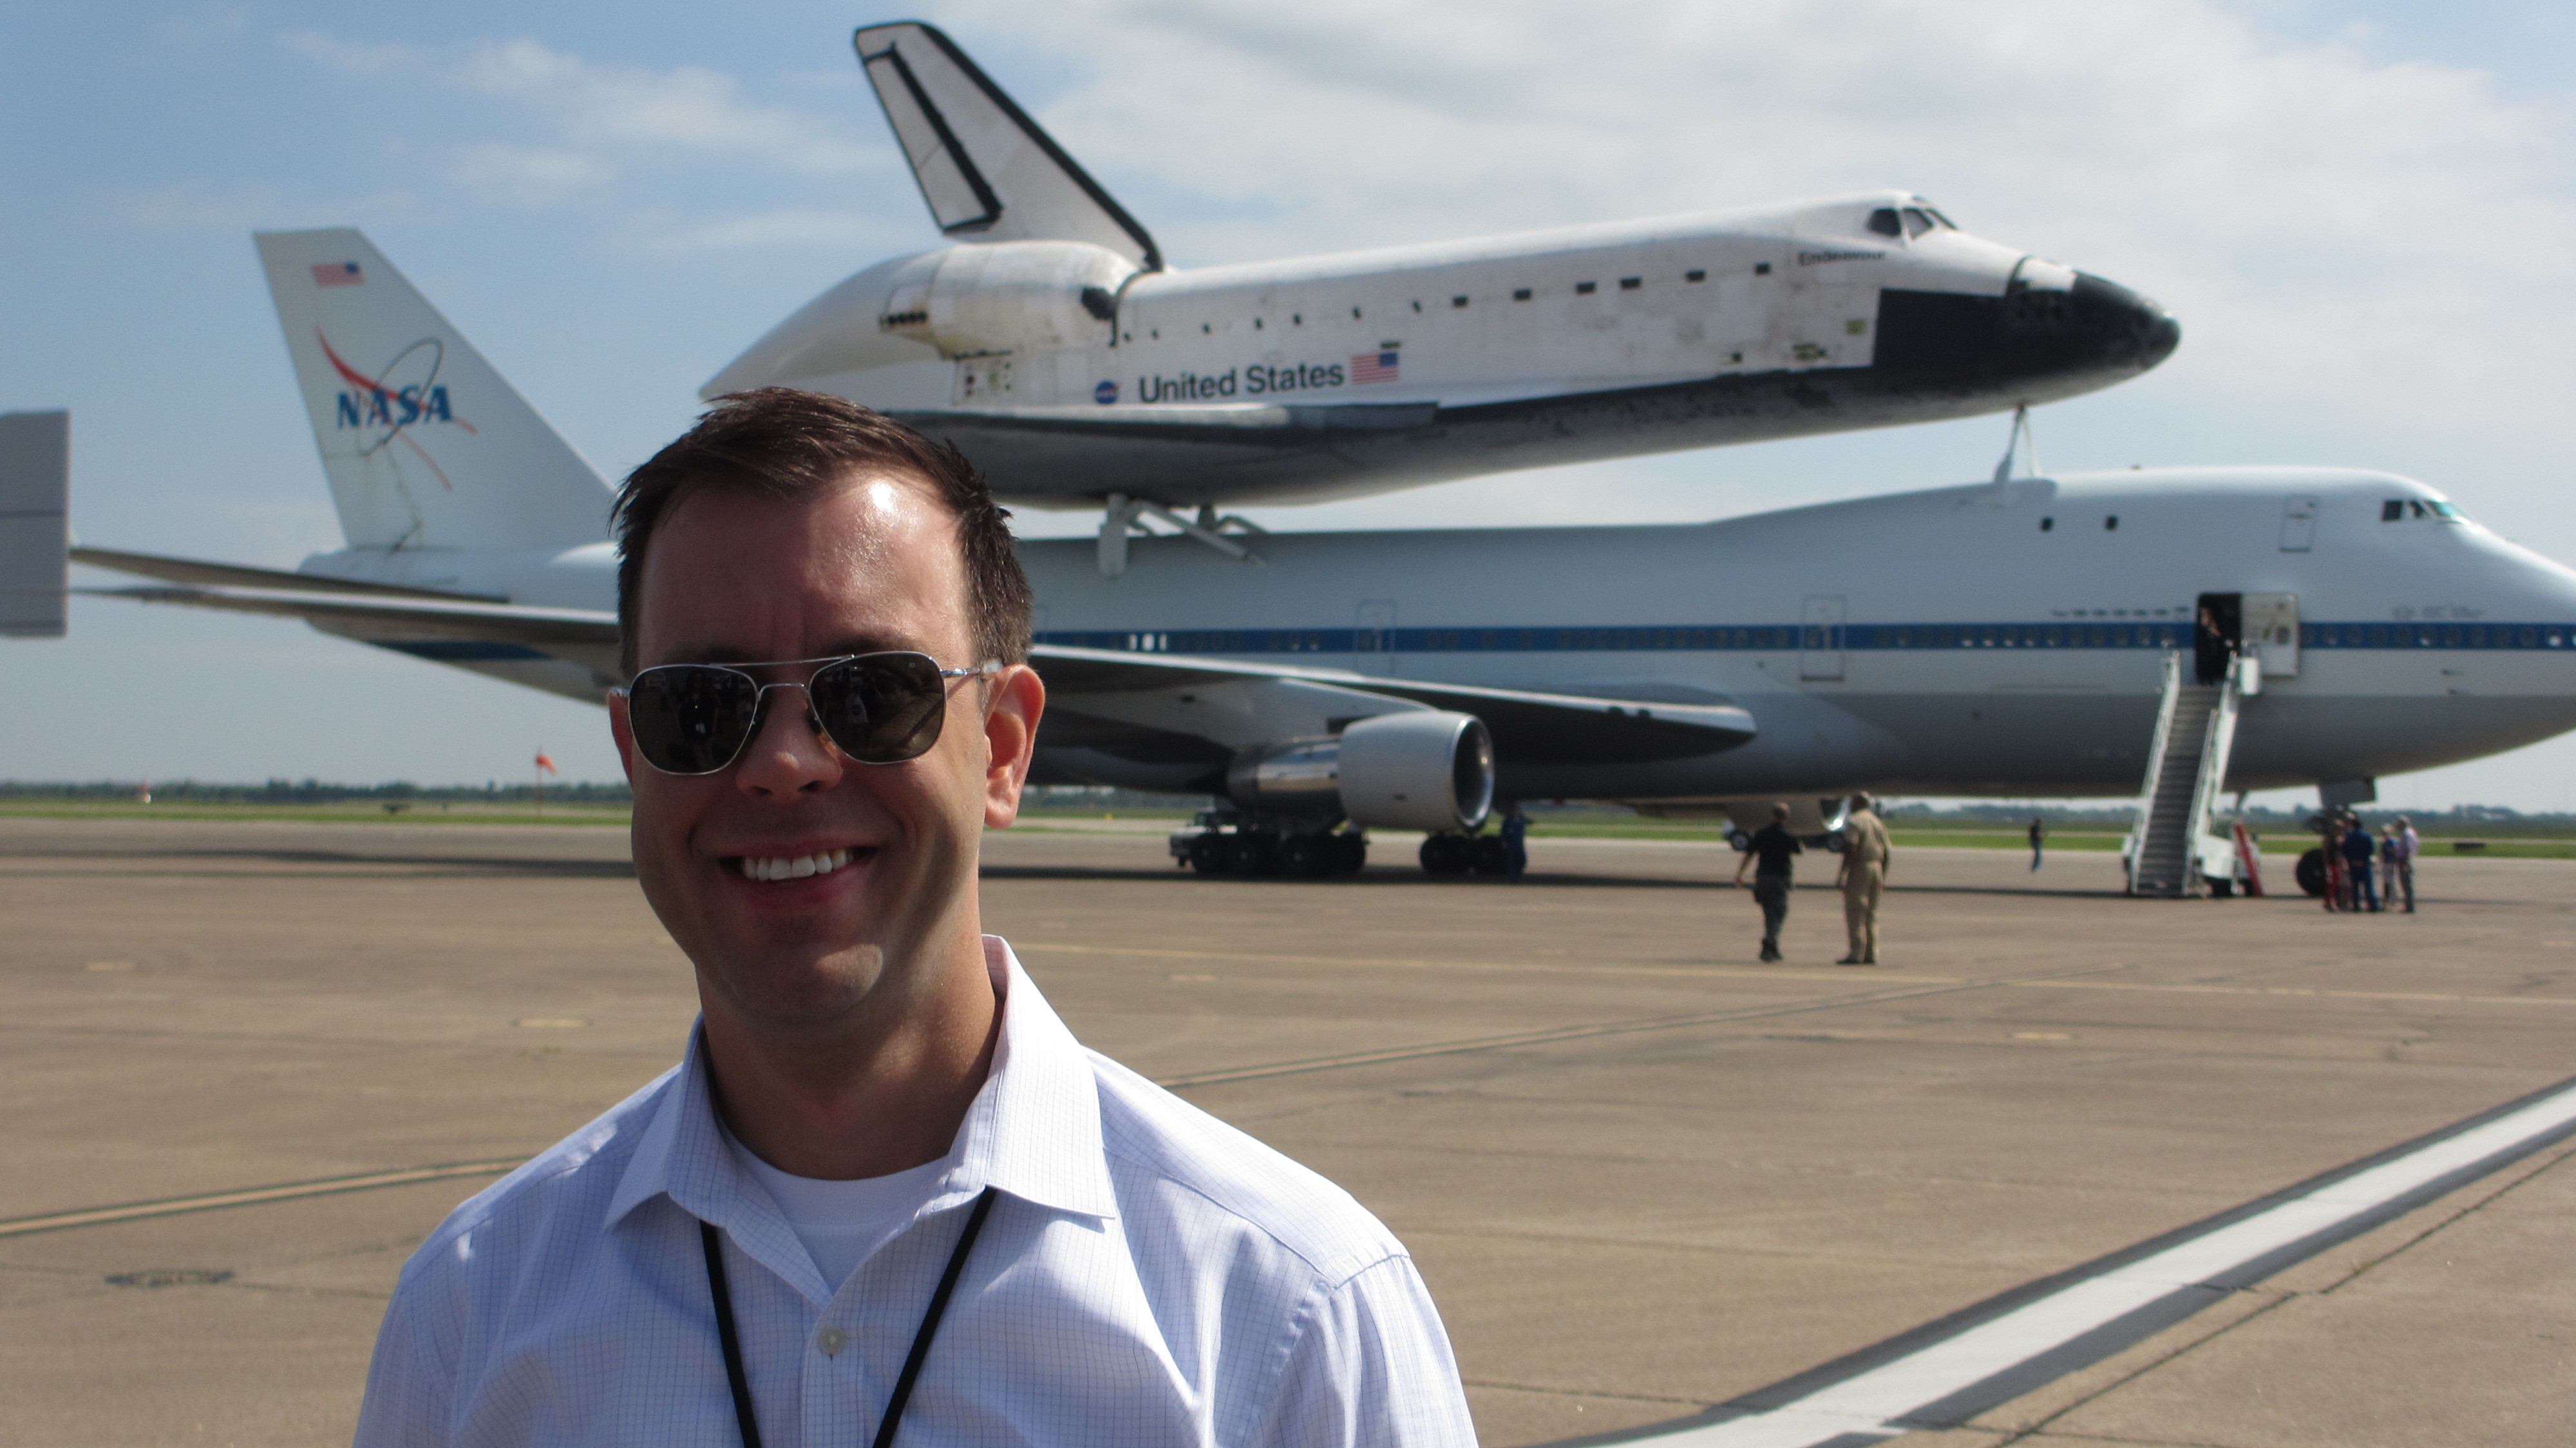 1999 Texas A&M journalism graduate Josh Byerly stands on the tarmac with the Space Shuttle Endeavour atop a NASA Shuttle Carrier Aircraft in the background